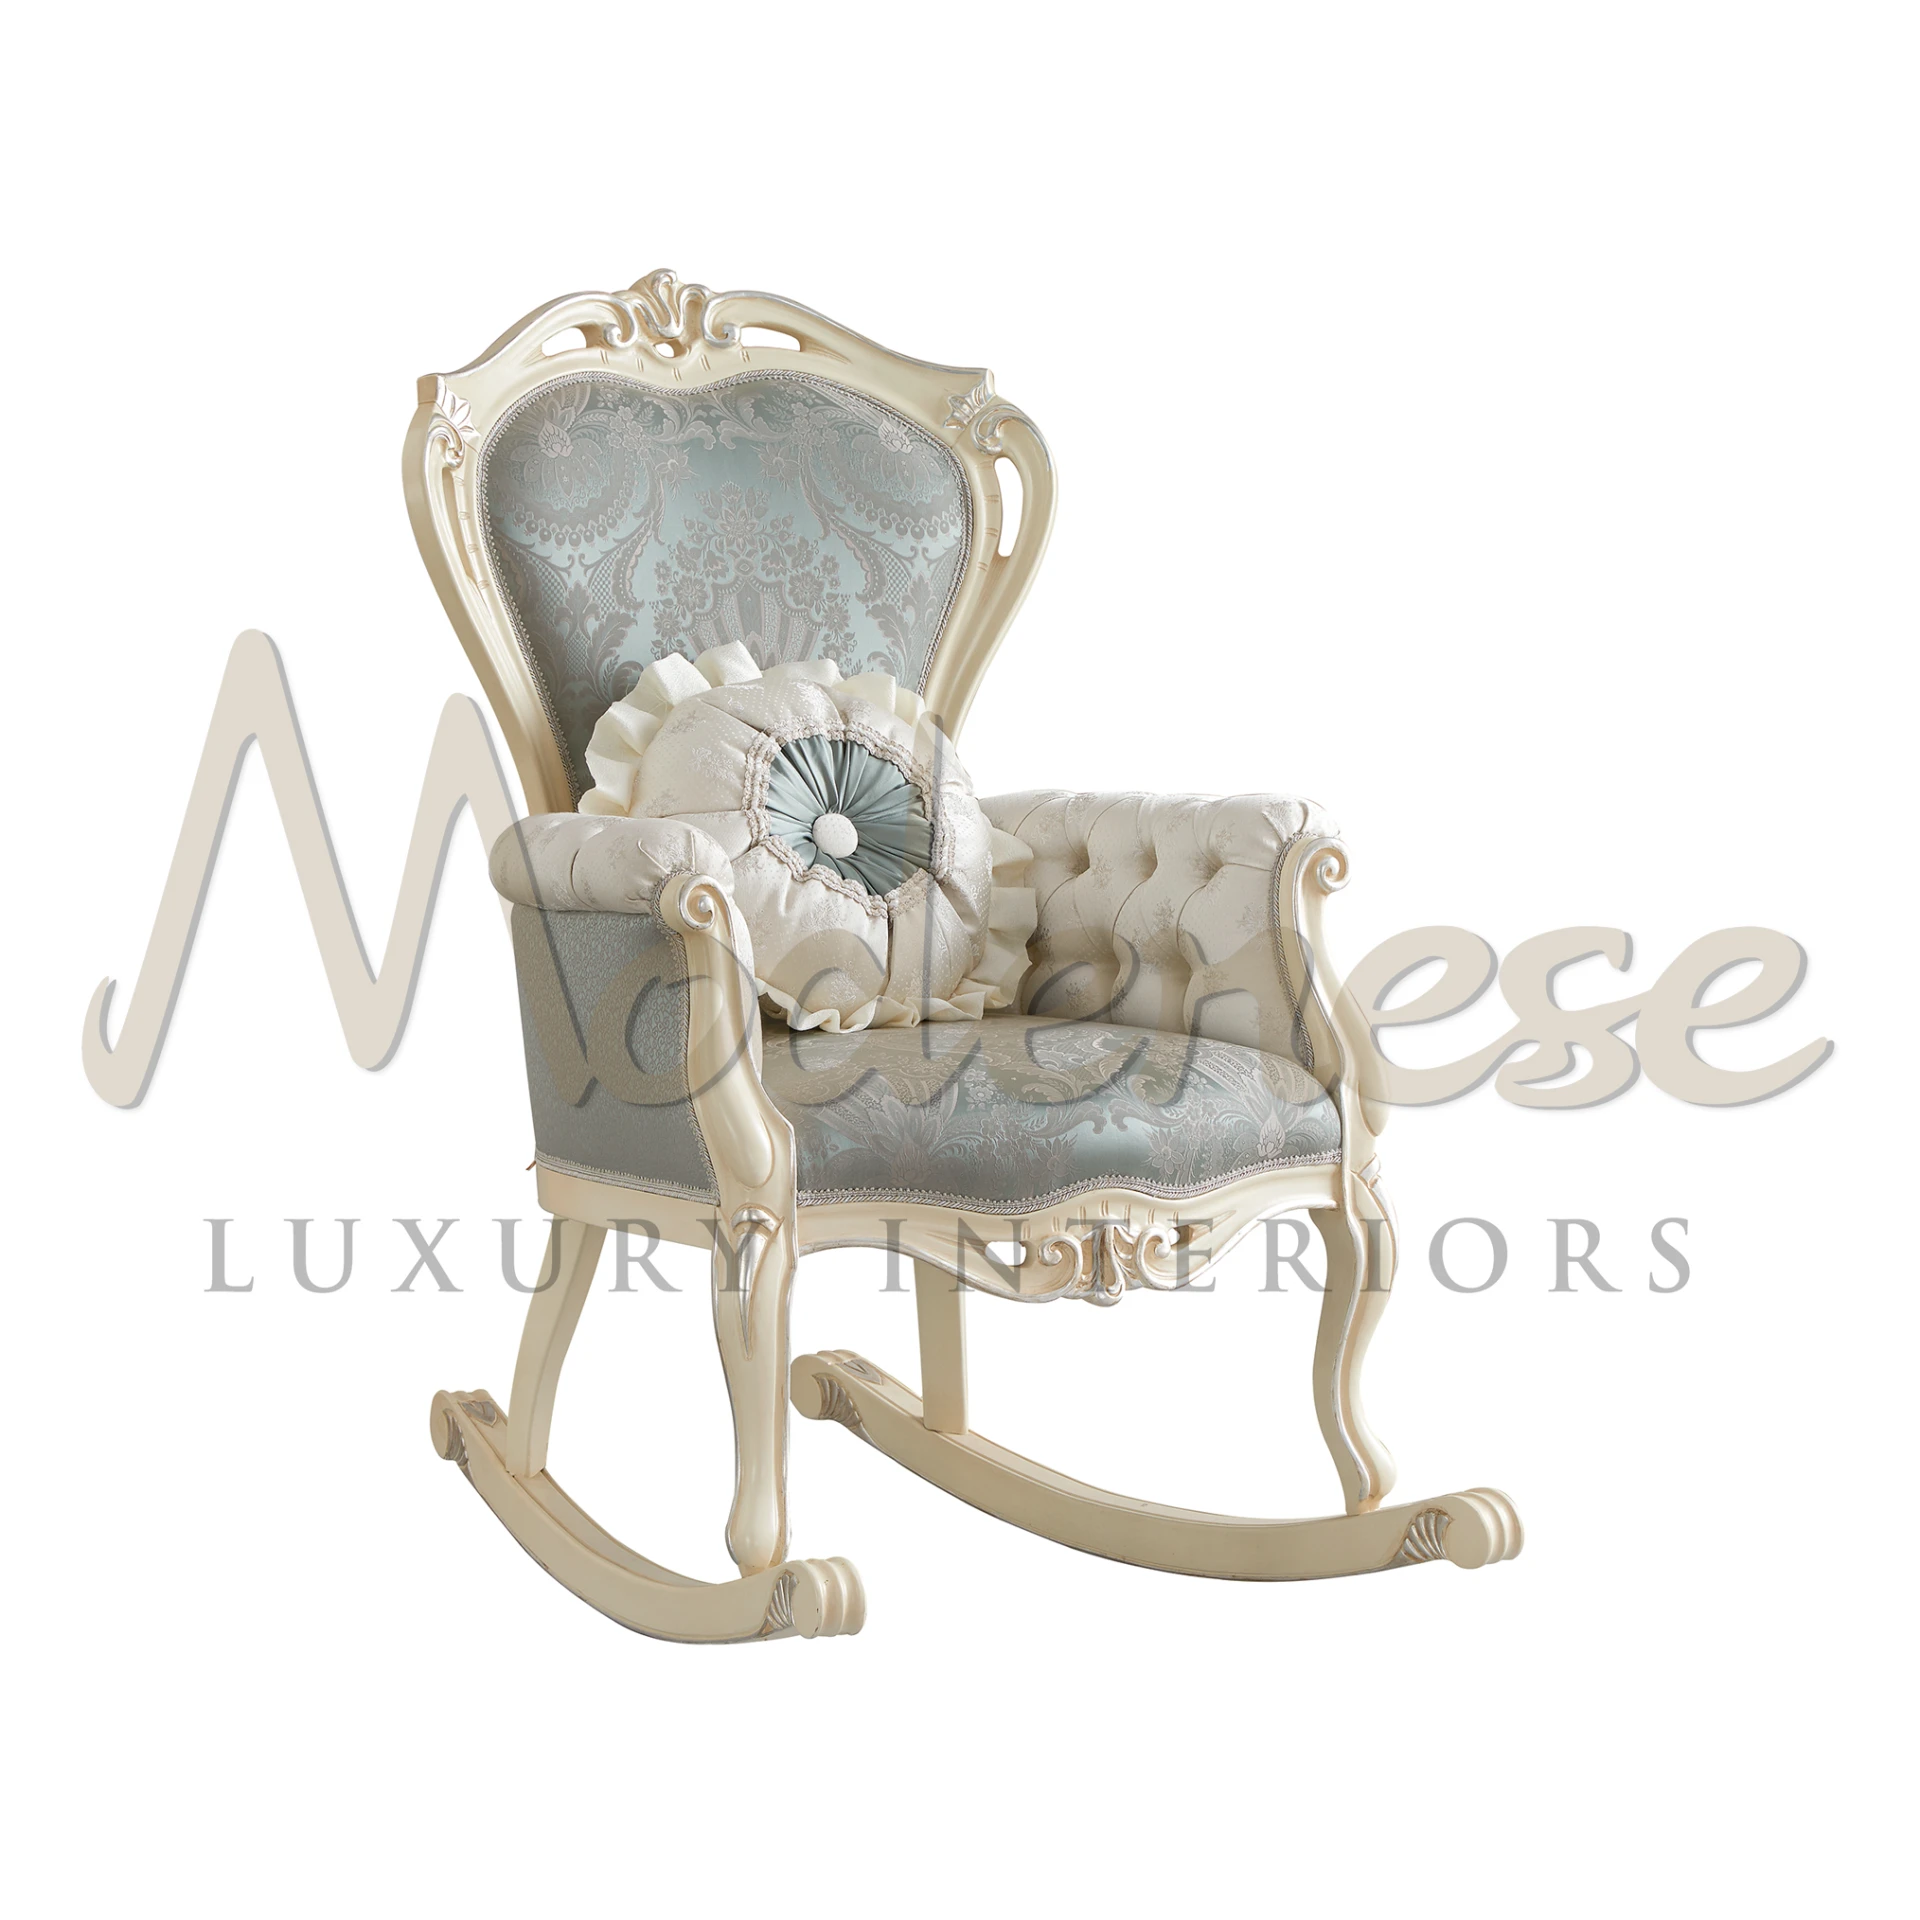 Elegant ivory rocking chair with pastel upholstery, showcasing intricate carved details and a soothing, inviting design made in italy by Modenese Furniture